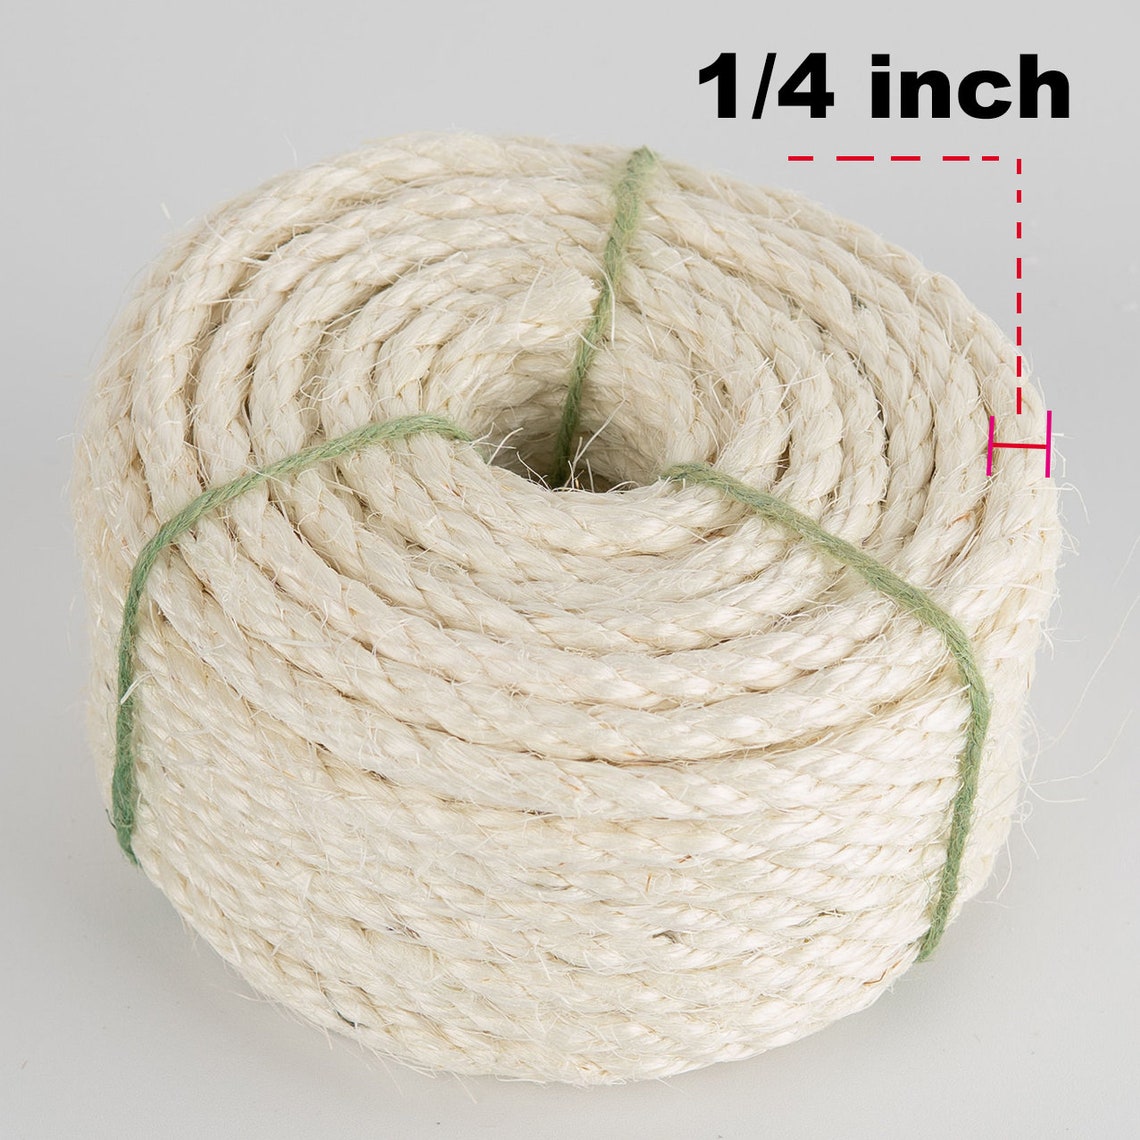 Dimaka White Sisal Rope Natural Fiber Twisted Rope 1/4 inch X Etsy